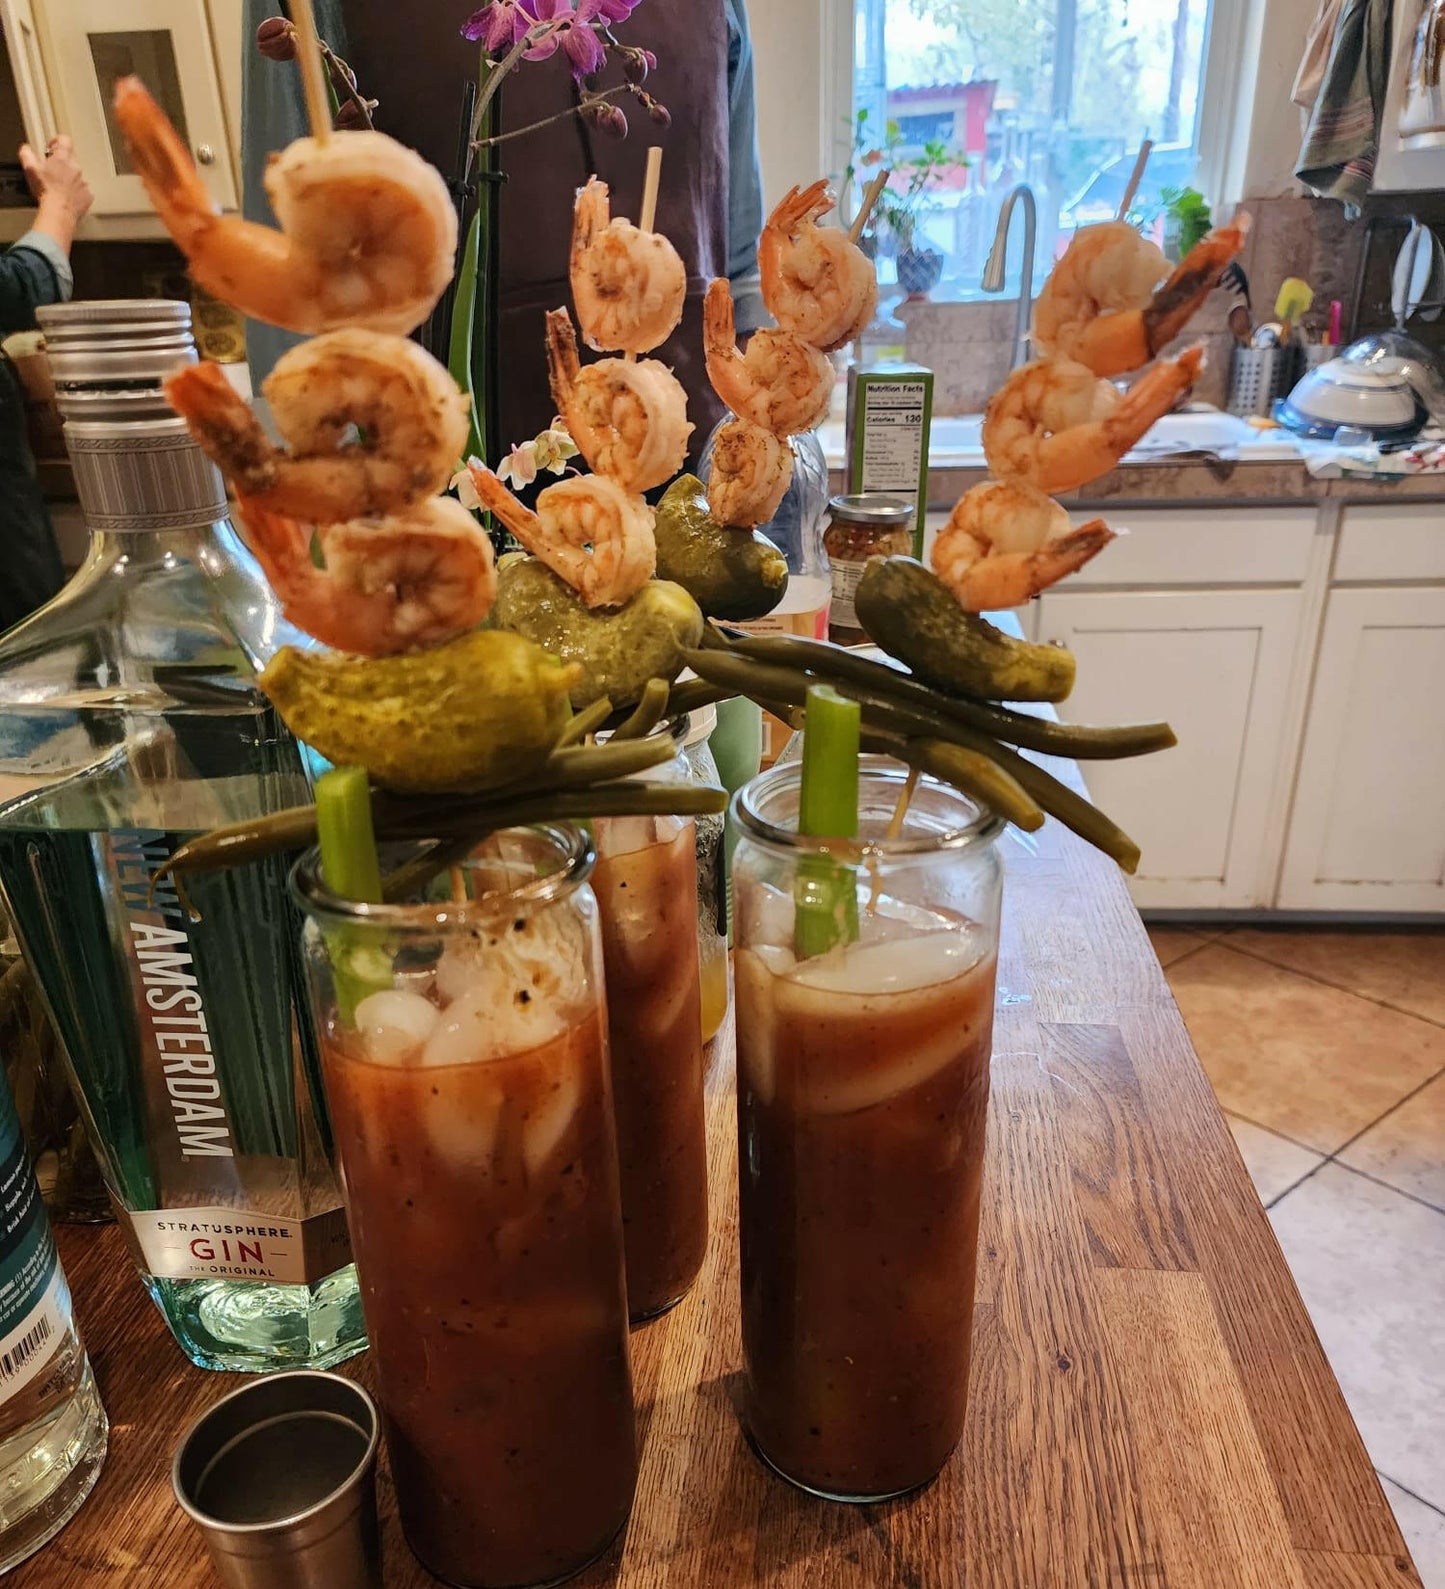 Bloody Mary Mix Spicy Roasted Blend Award Winning Thick Rich Flavor.